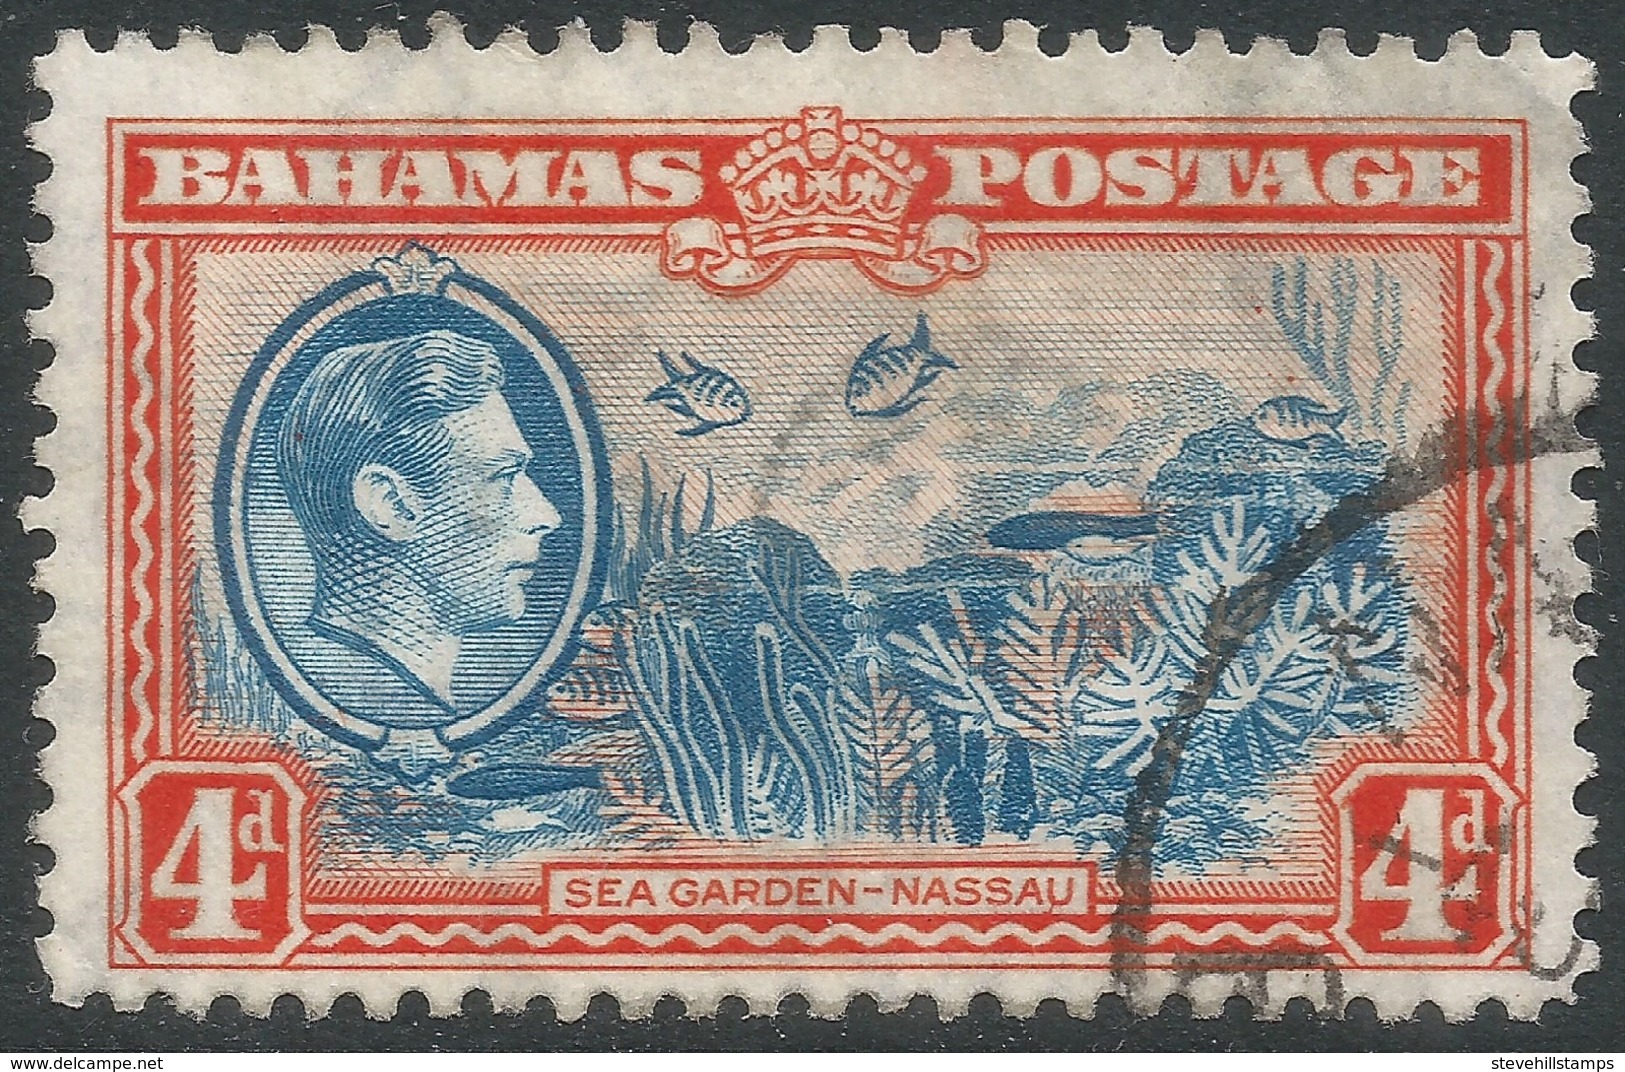 Bahamas. 1938 KGVI. 4d Used. SG 158 - 1859-1963 Crown Colony